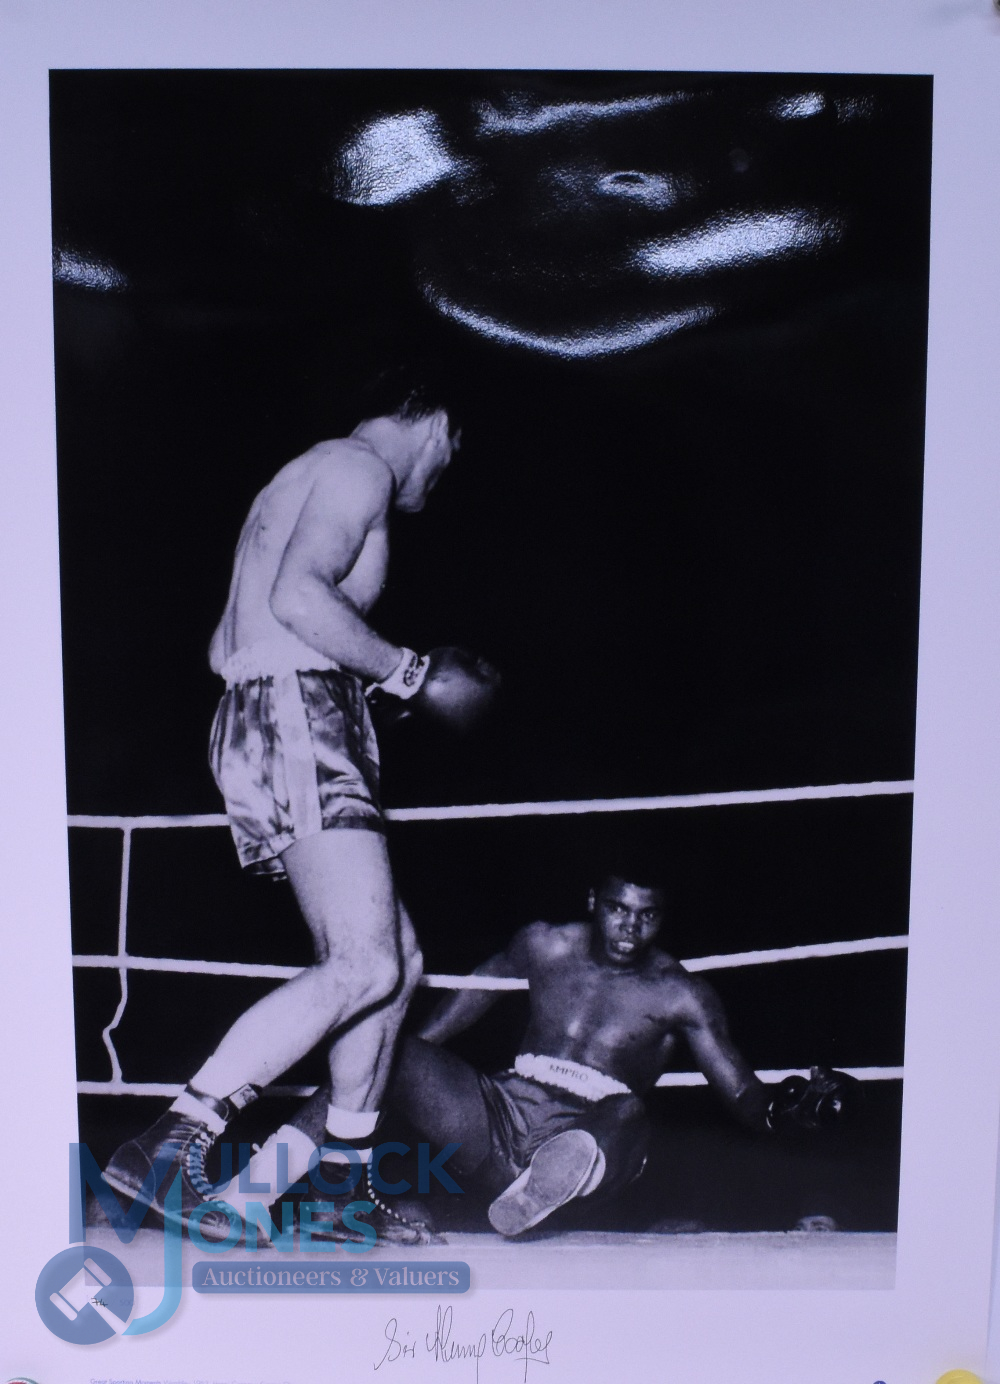 Boxing Sir Henry Cooper Autographed Print. This famous photograph where Muhammad Ali is on the